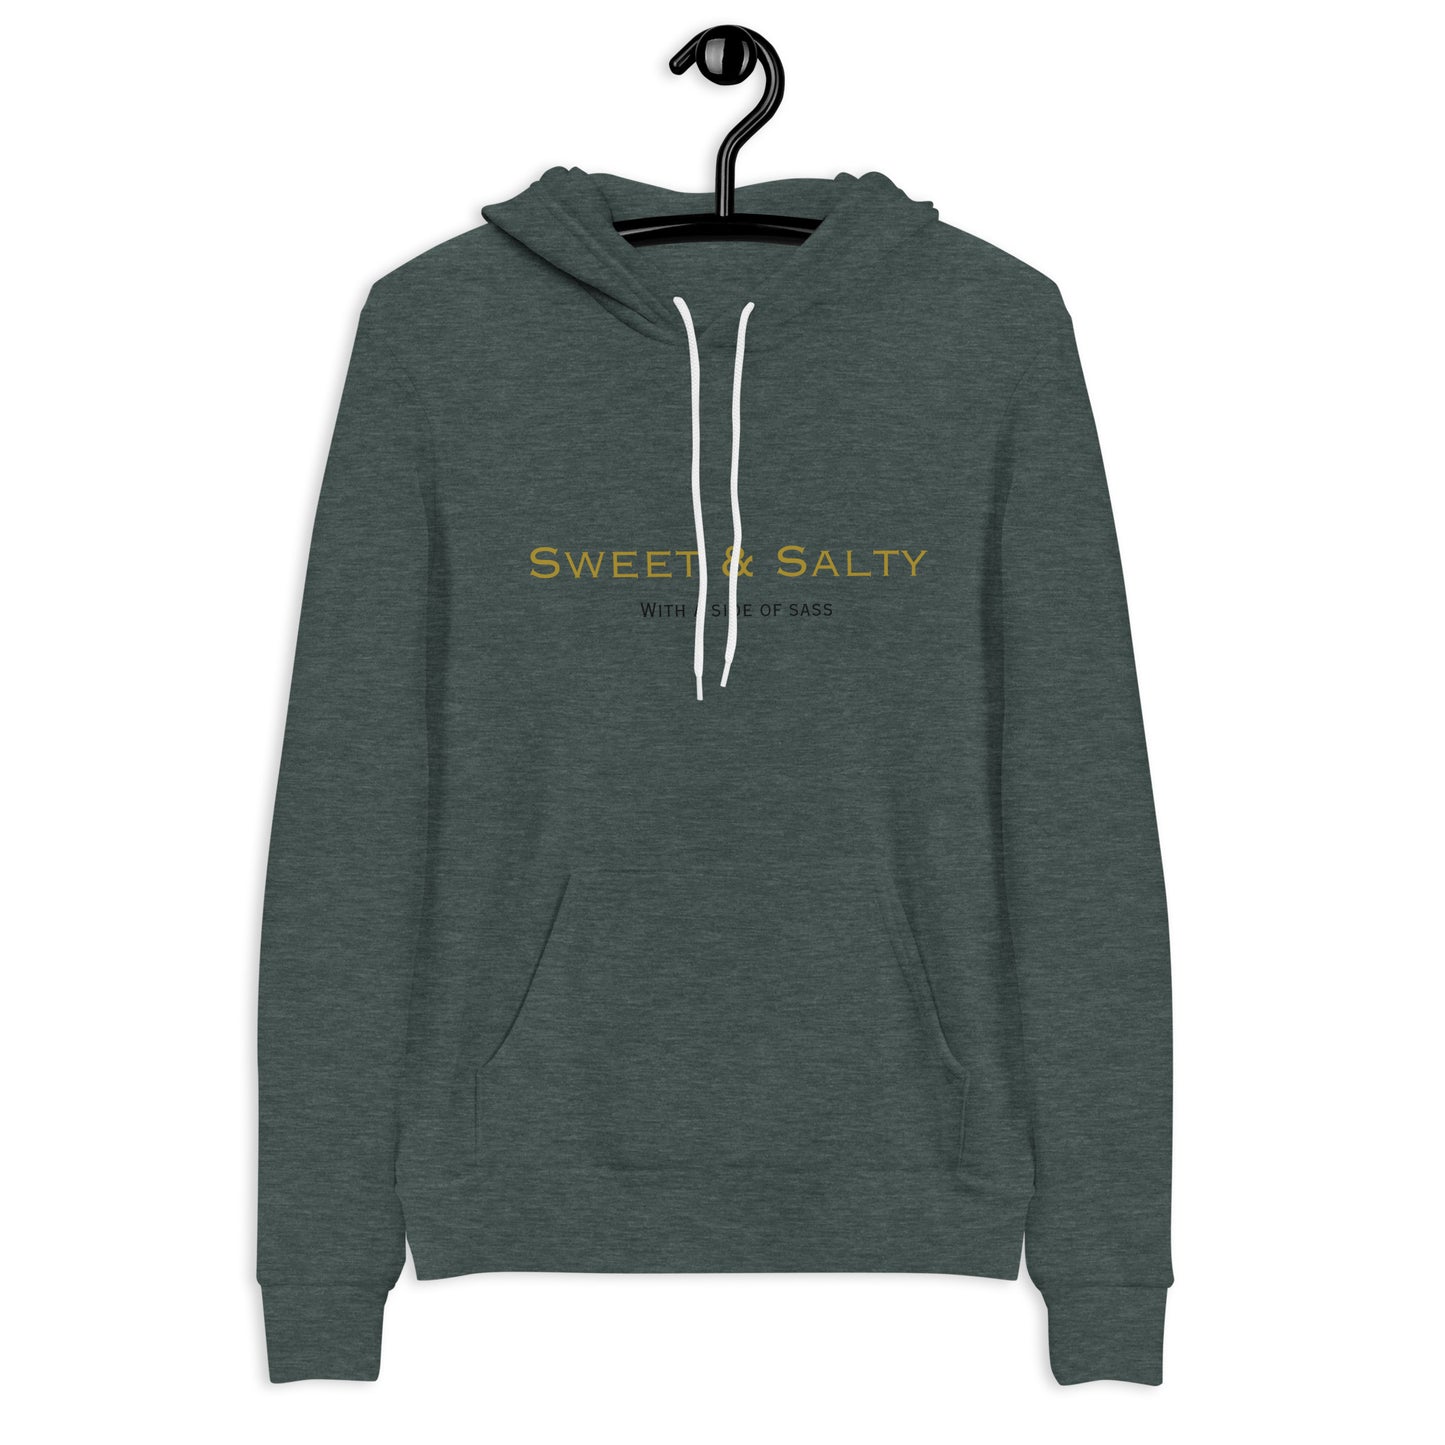 SWEET AND SALTY WITH A DASH OF SASS Unisex hoodie